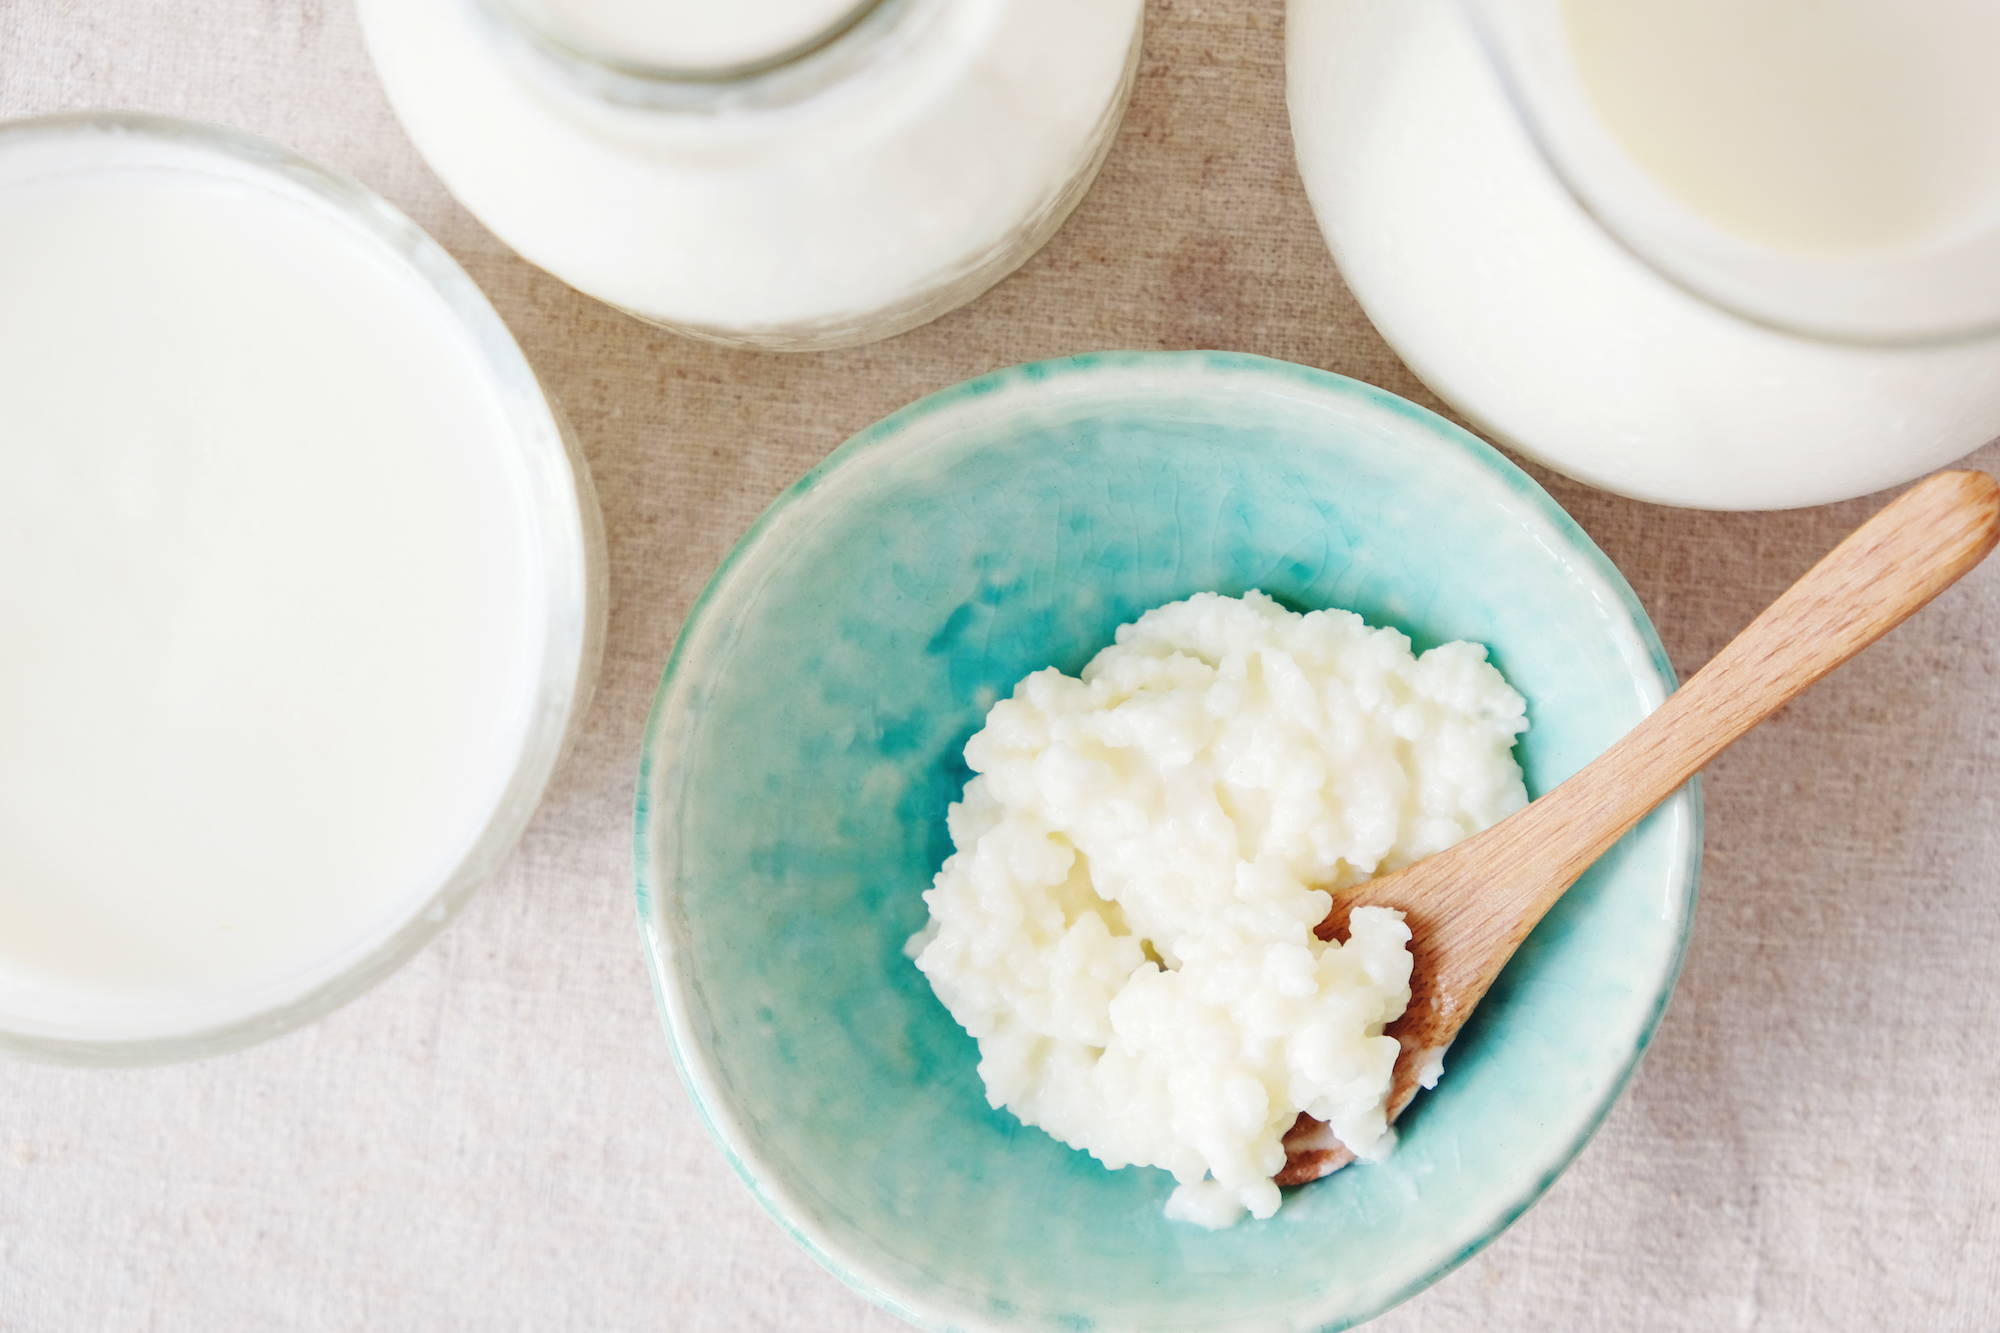 Kefir can be cultaivated from dairy free alternatives